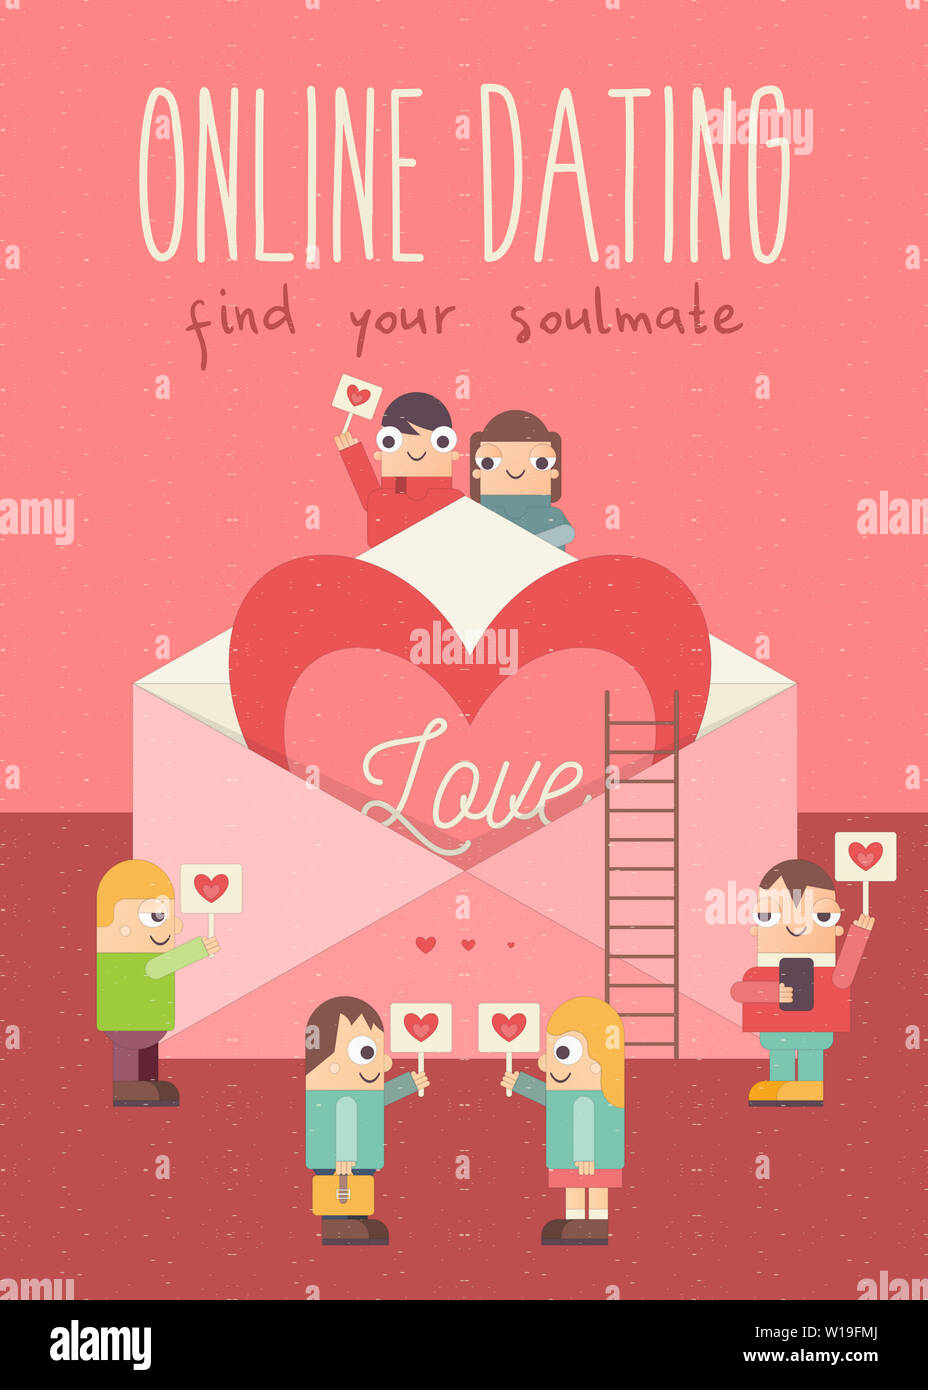 Online Dating Poster. Cute Cartoon People with Hearts. Idea of Internet or Remote Relationship, Wedding, Love. Big Heart in Envelope. Vector Illustrat Stock Photo